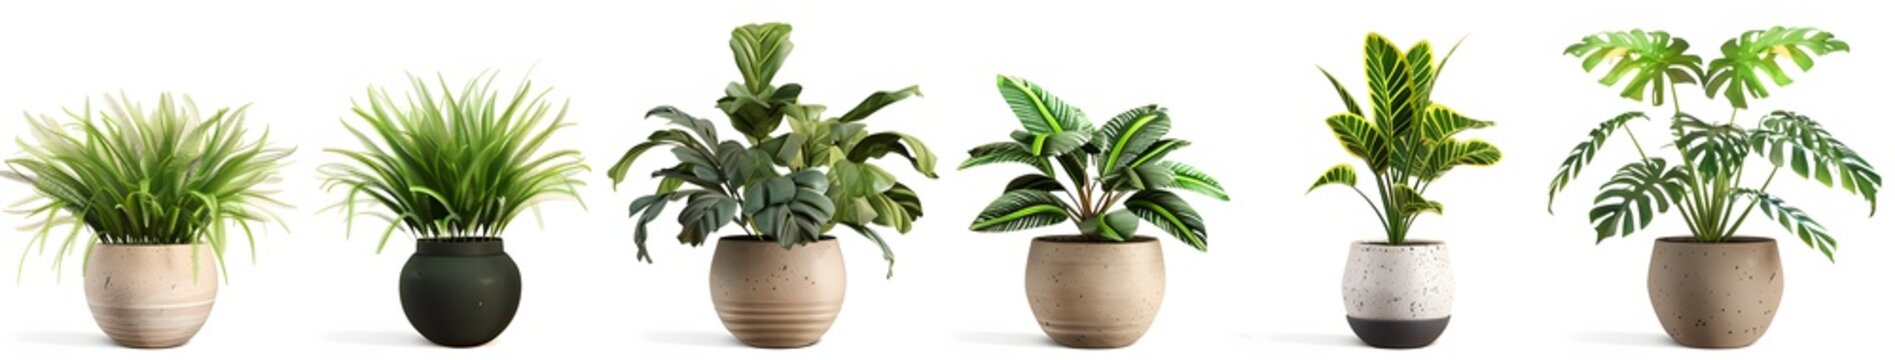 two potted plants with green leaves